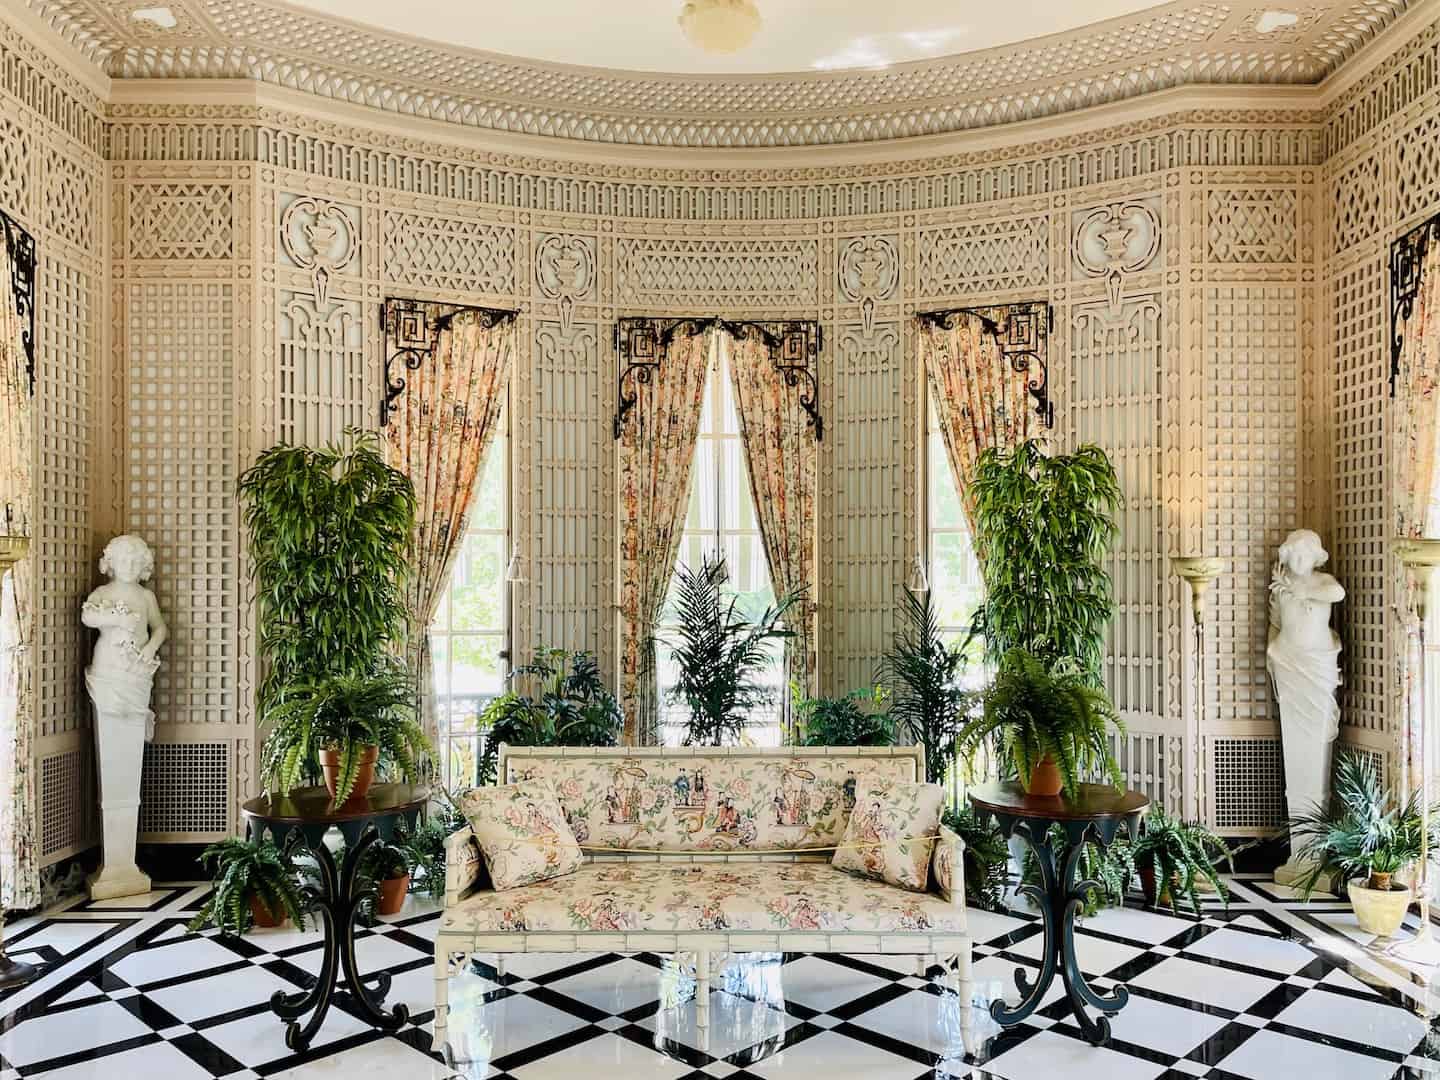 Potted plants, two statues and an upholstered sofa sit on a black and white tiled floor at Nemours Estate.